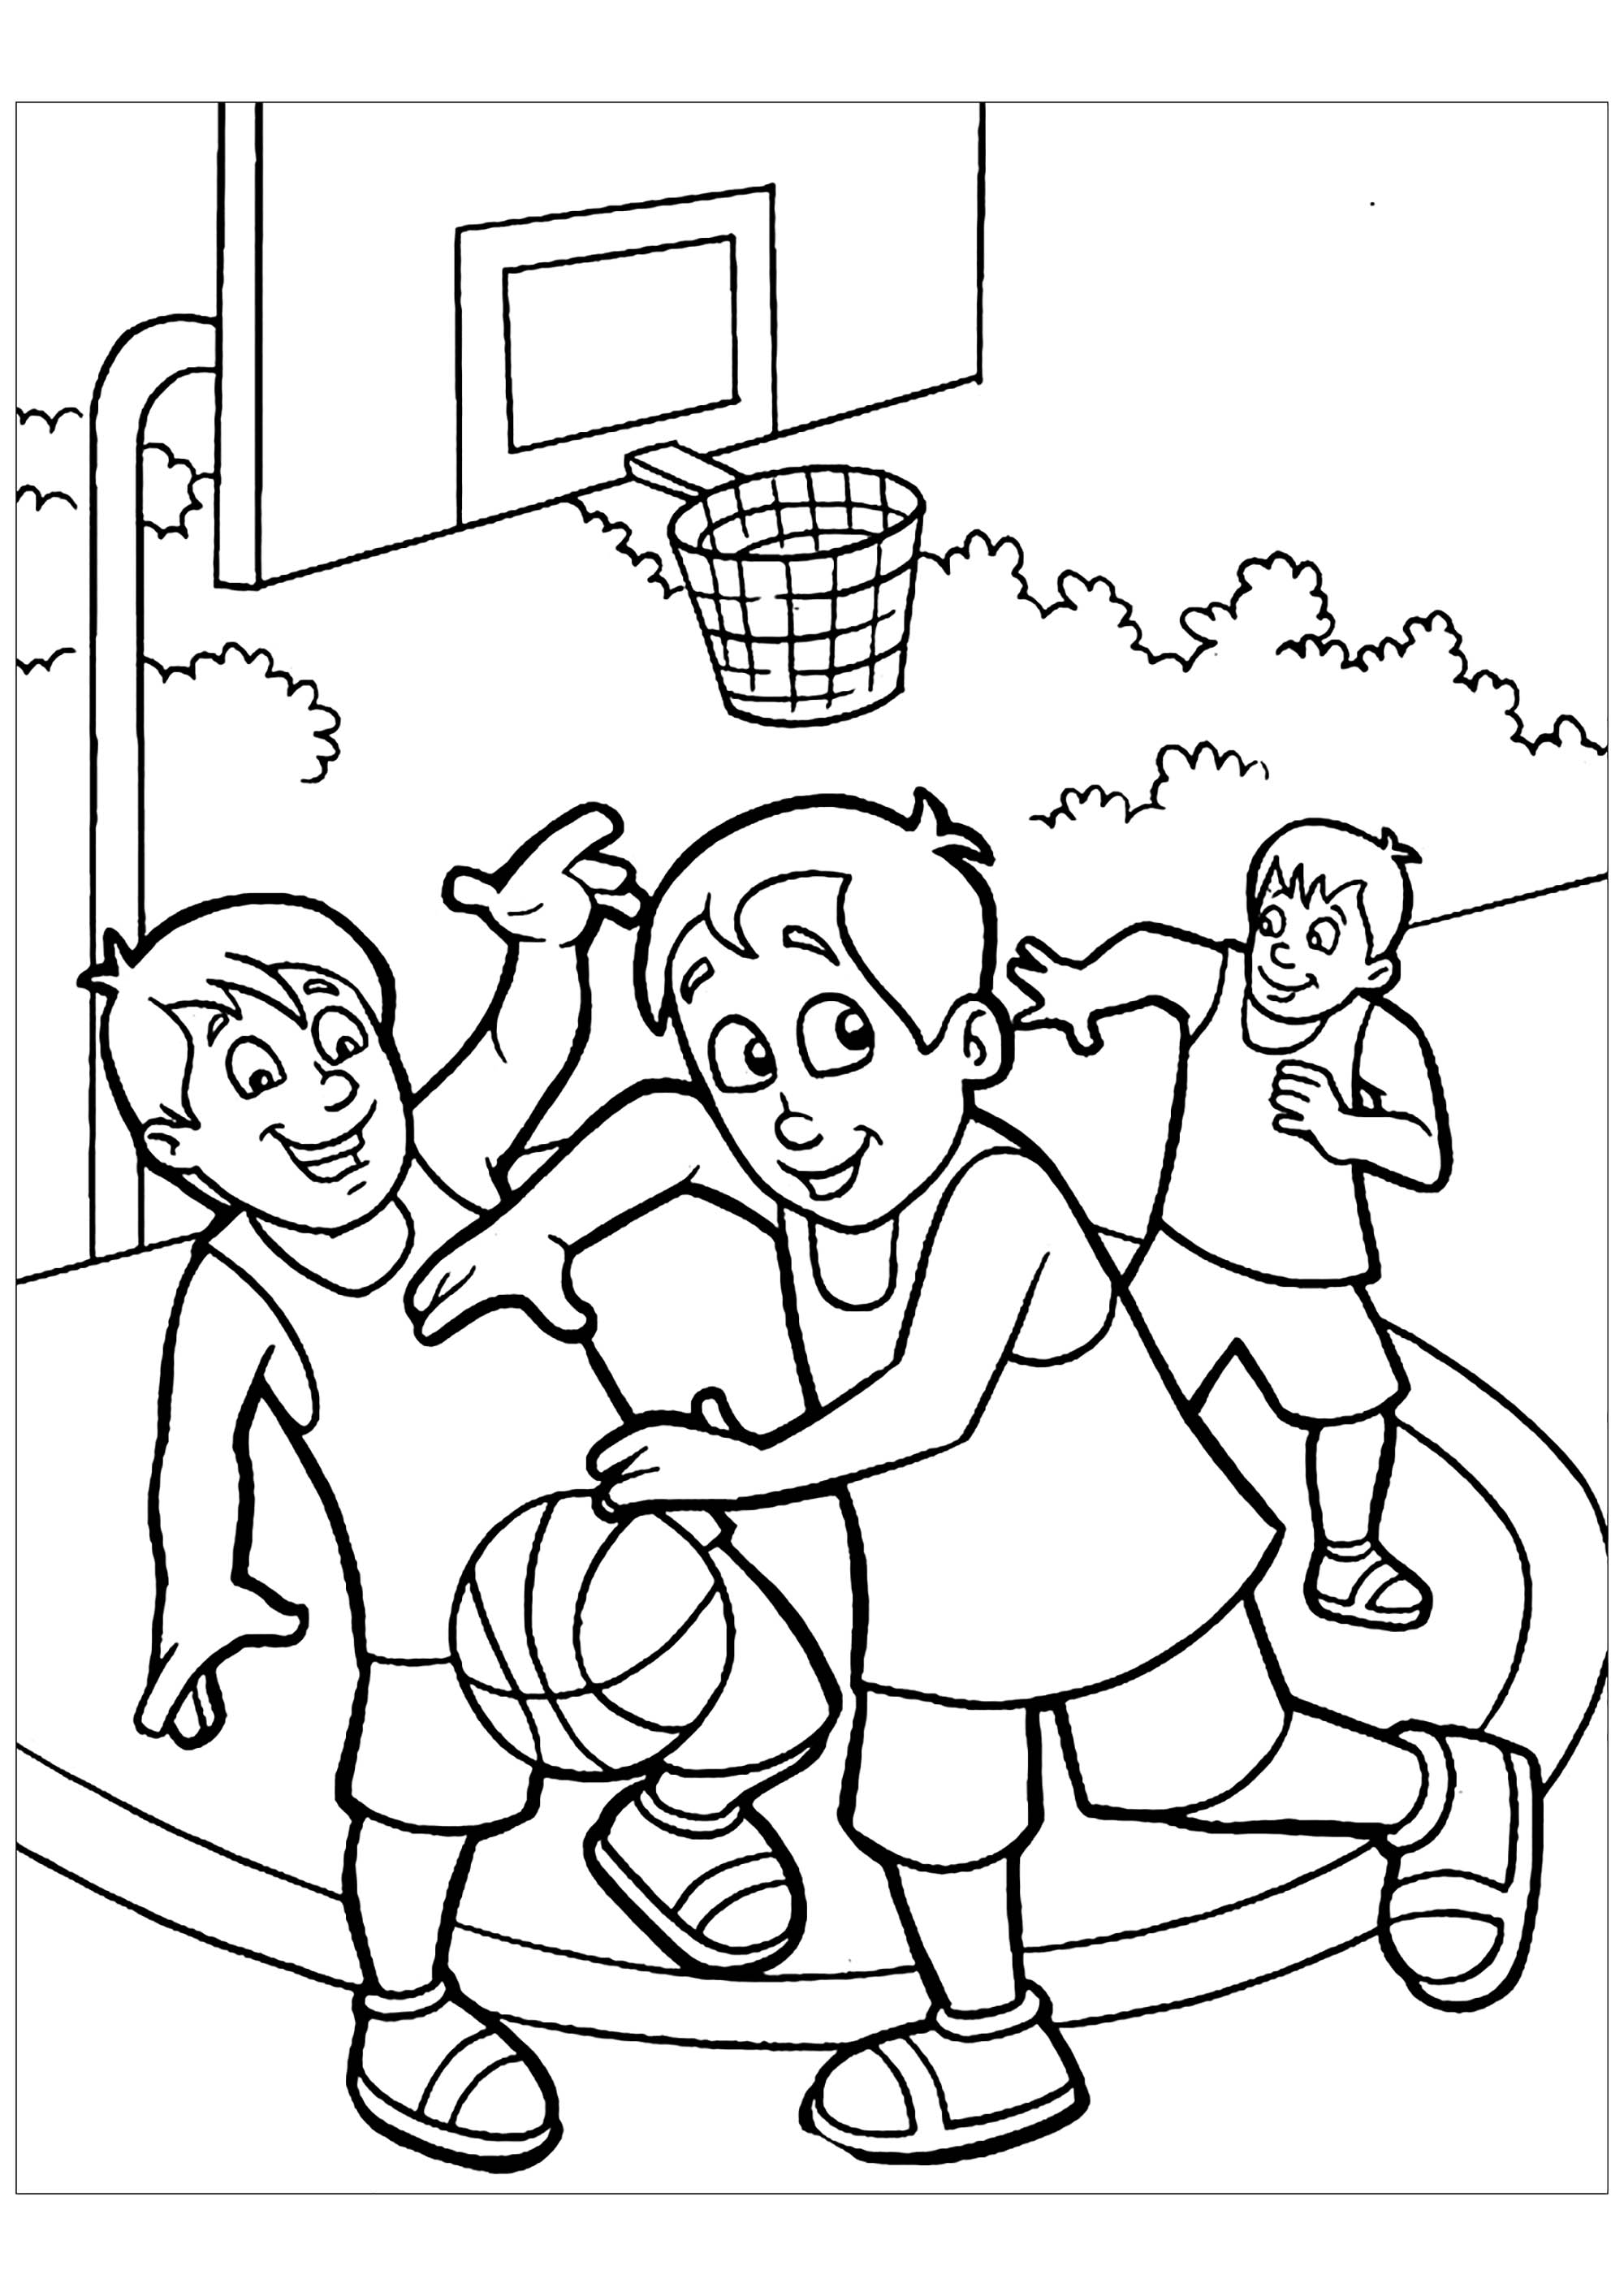 Children Playing Basketball Coloring Page